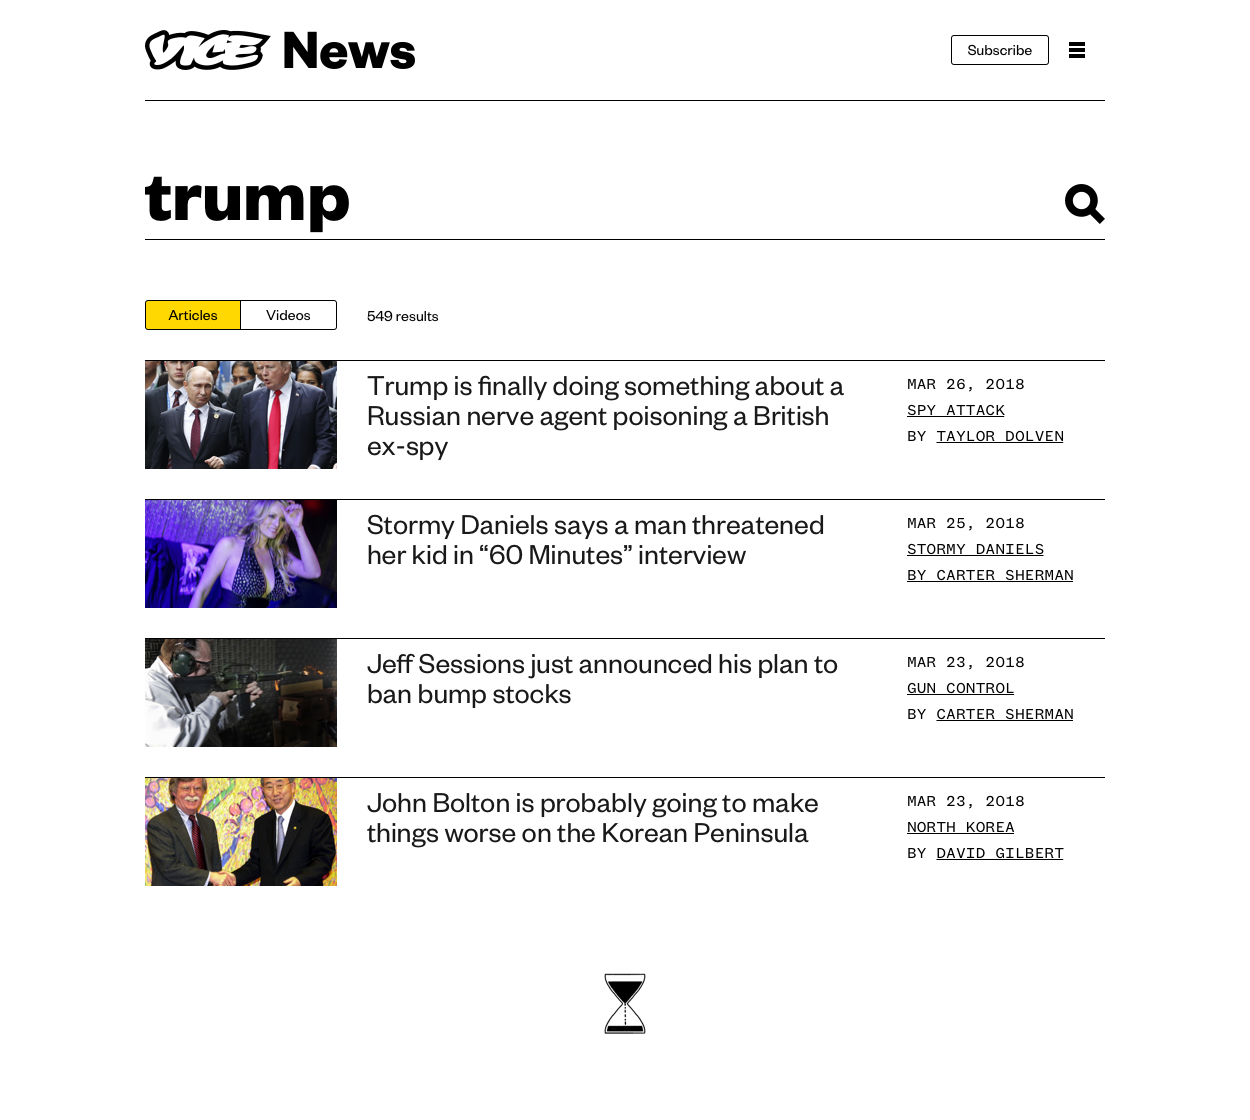 Search on VICE News